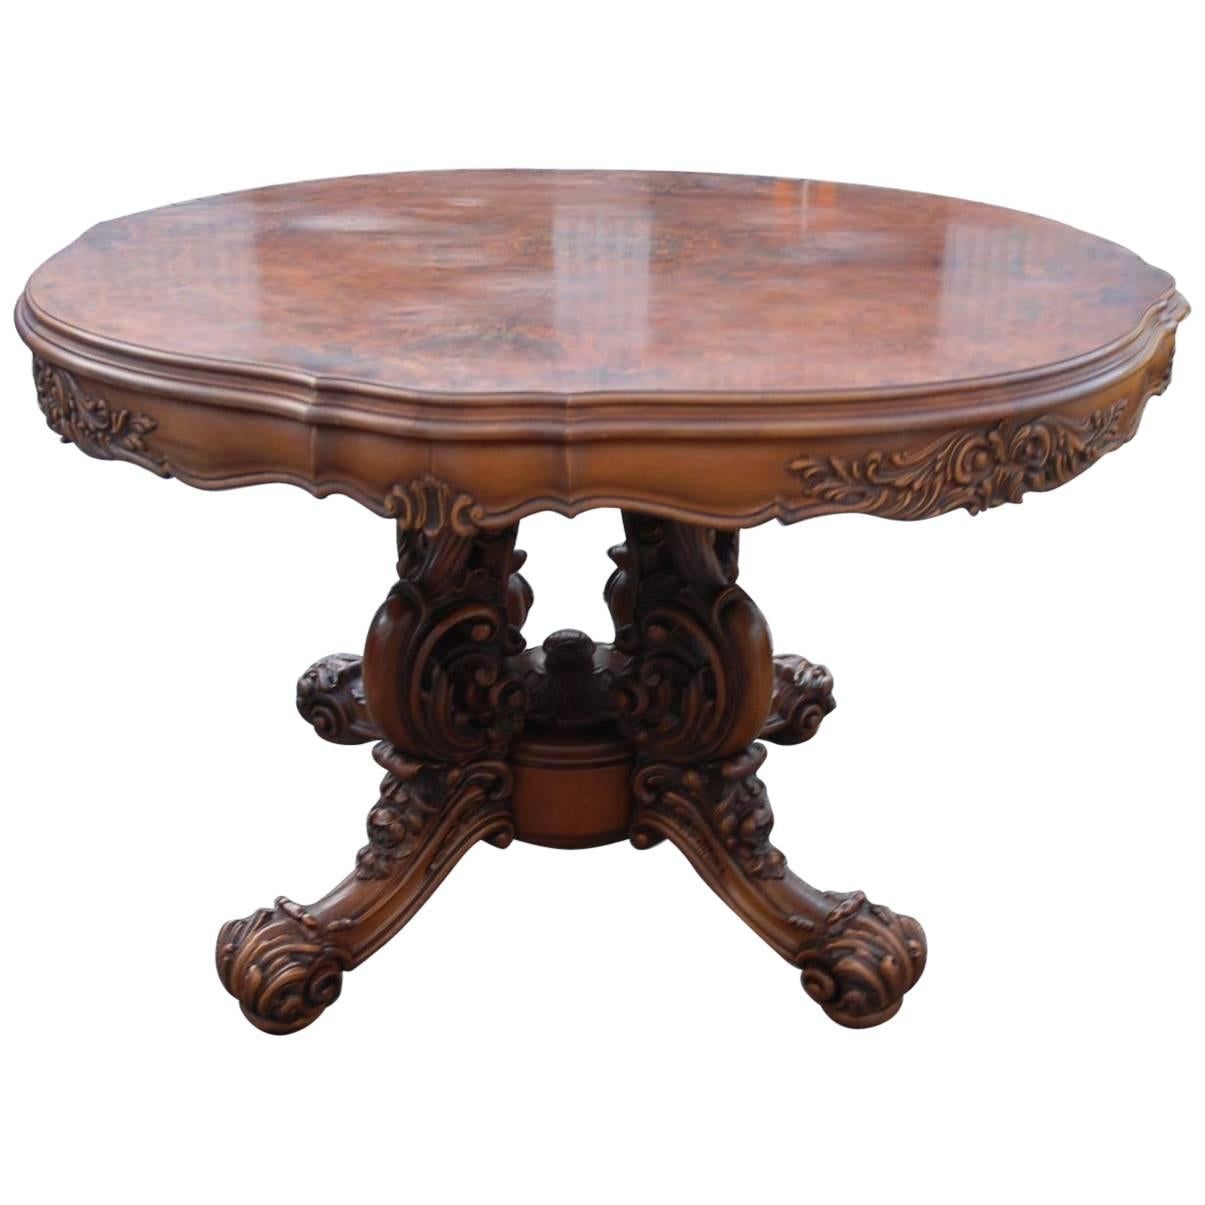 Vintage Italian Baroque Style Carved Wood Centre Table with Marquetry Inlay Top